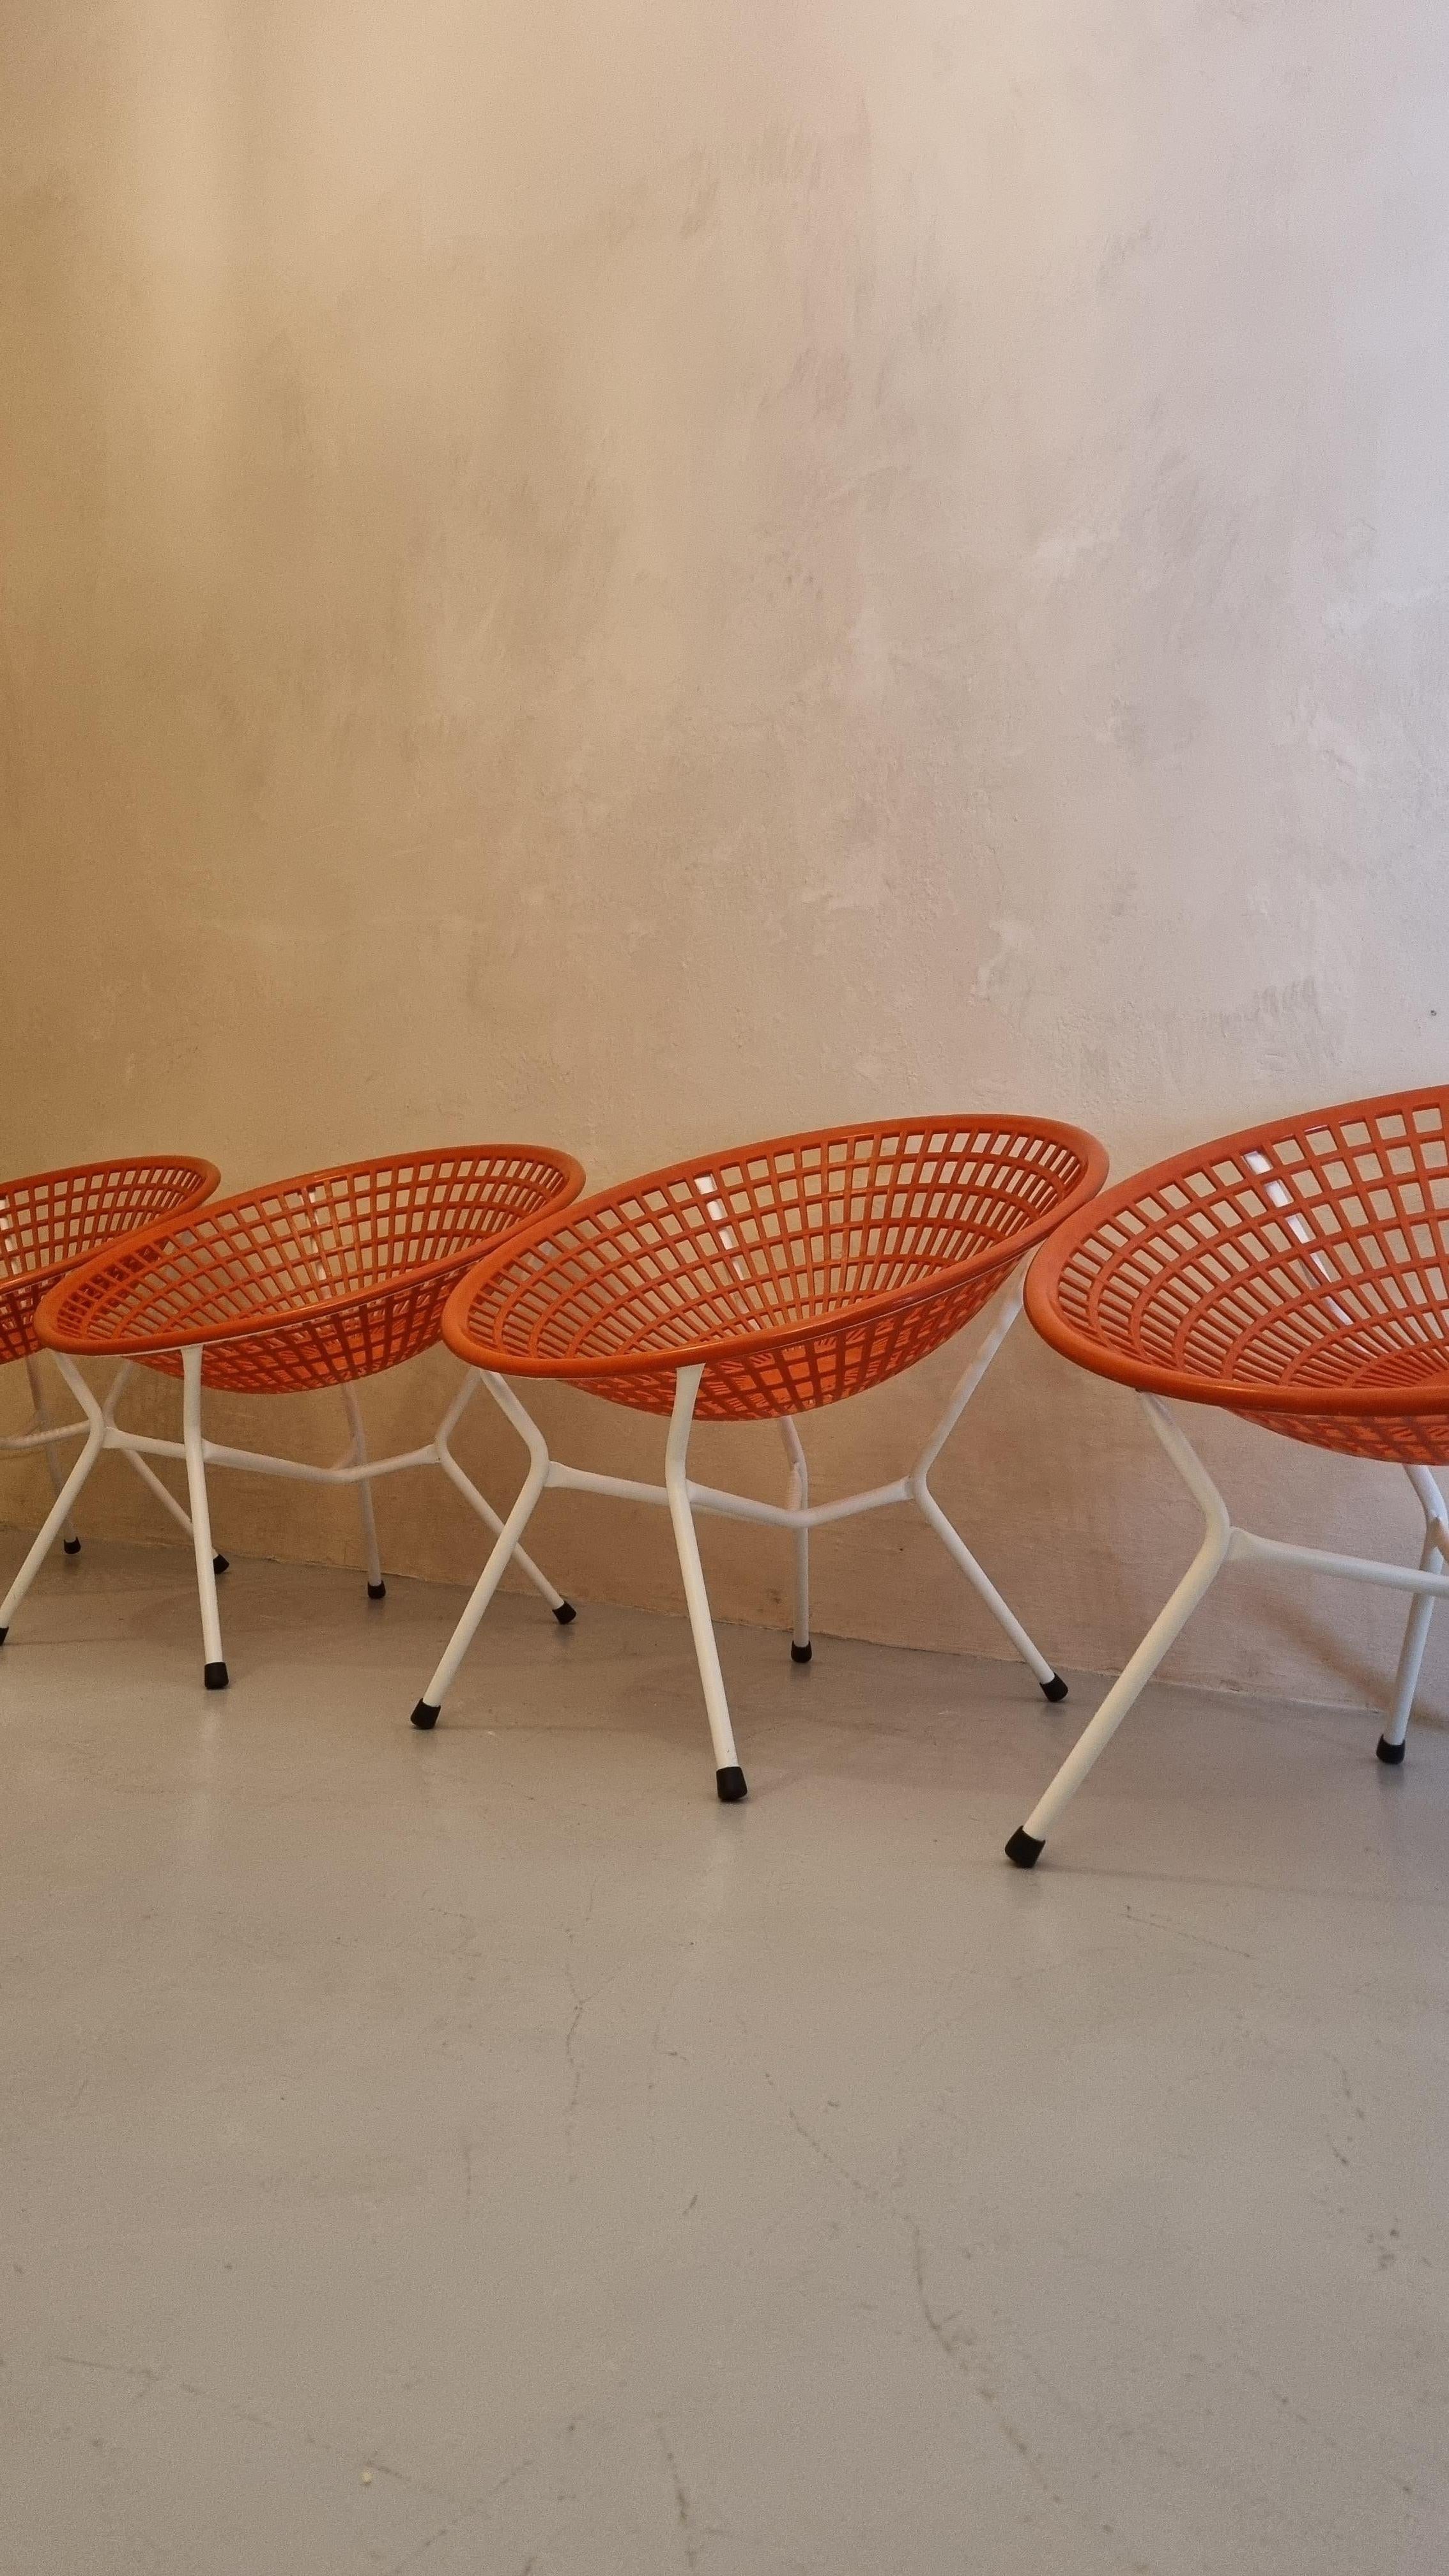 Set of 4  chairs in painted iron and plastic chairs produced by Ivars Brescia, 1970.
Excellent conditions, restored.